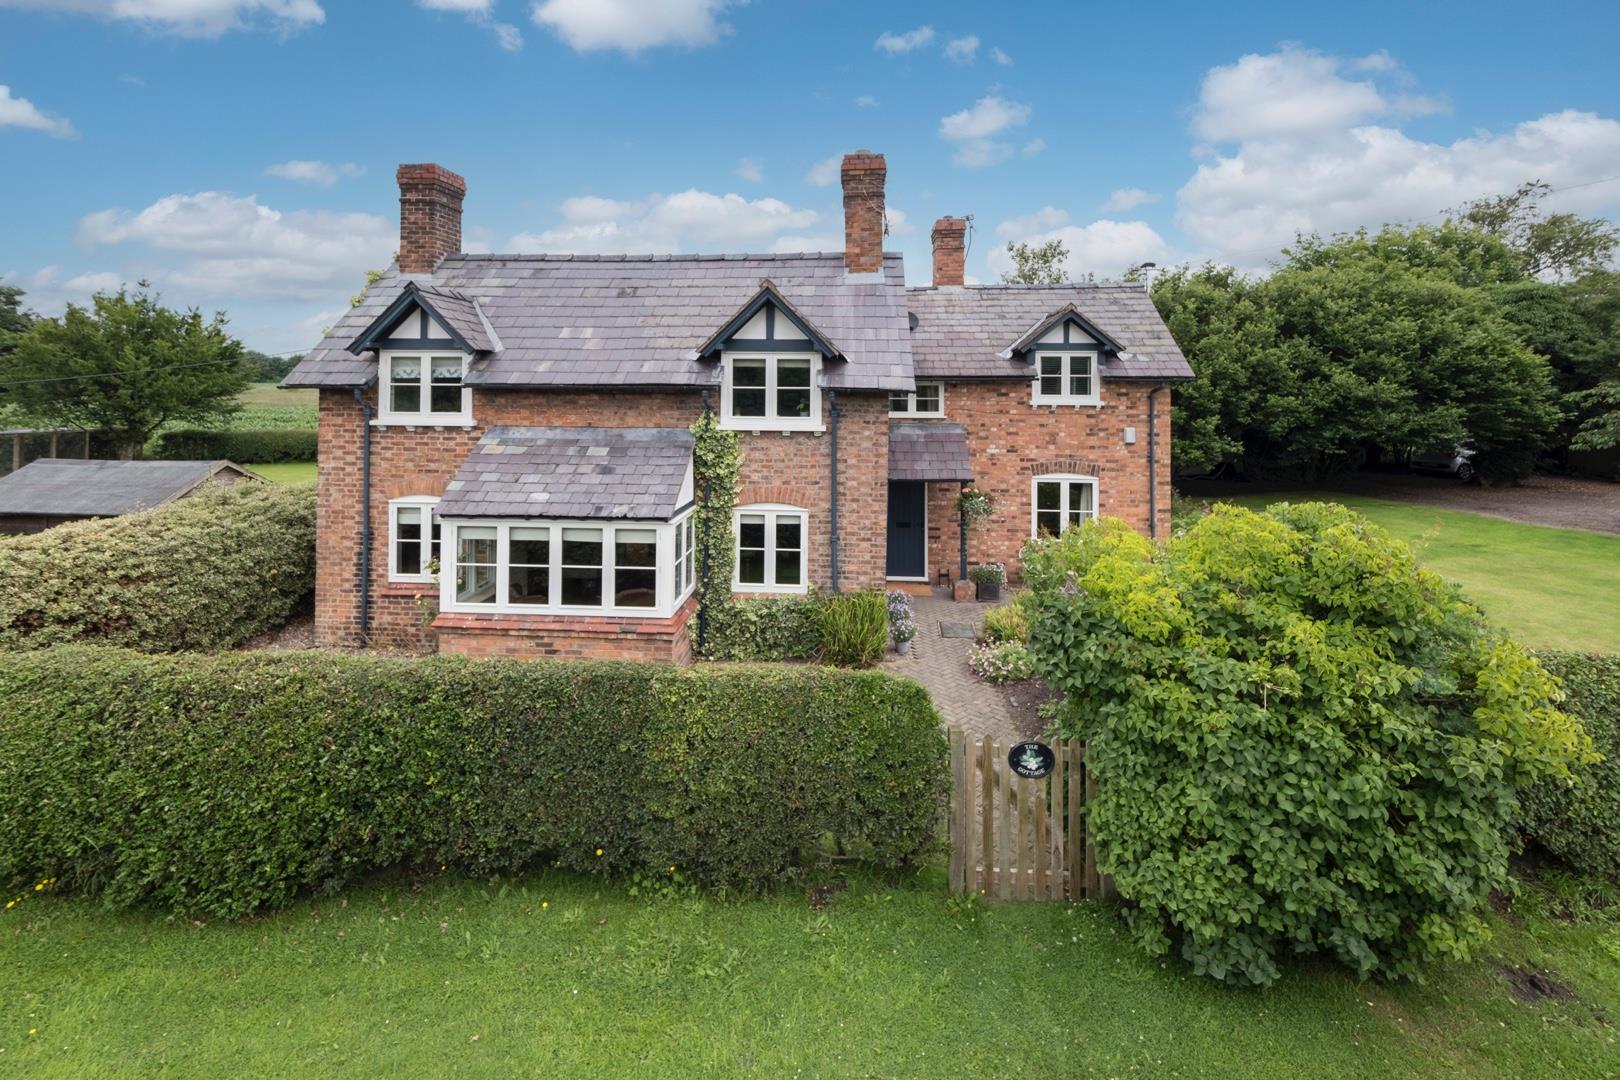 4 bedroom  Detached House for Sale in Spurstow